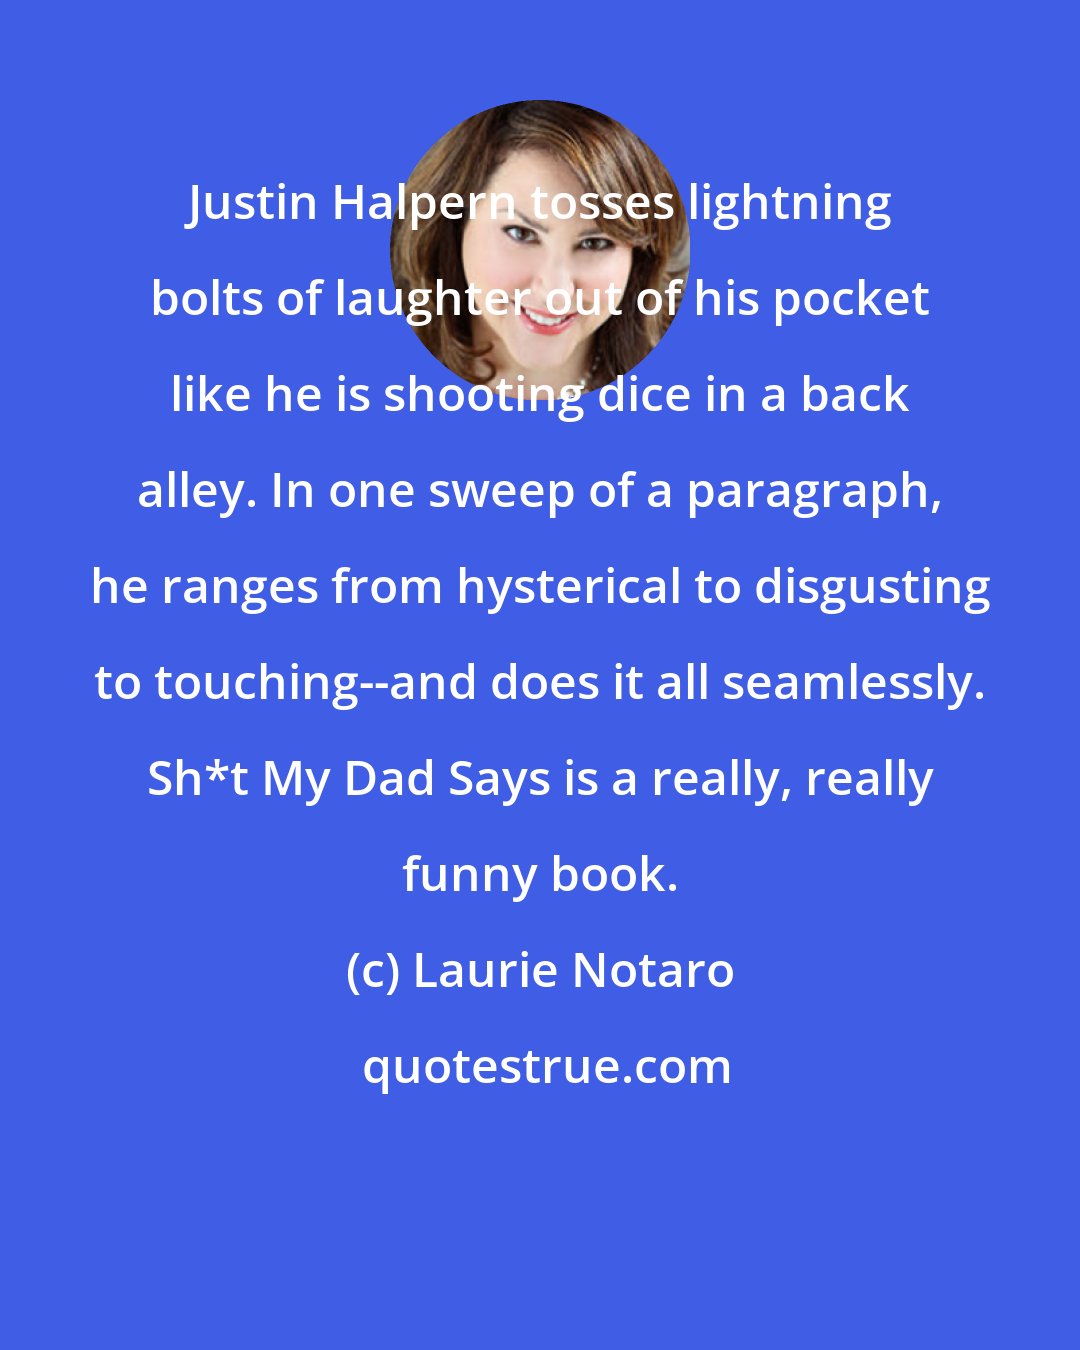 Laurie Notaro: Justin Halpern tosses lightning bolts of laughter out of his pocket like he is shooting dice in a back alley. In one sweep of a paragraph, he ranges from hysterical to disgusting to touching--and does it all seamlessly. Sh*t My Dad Says is a really, really funny book.